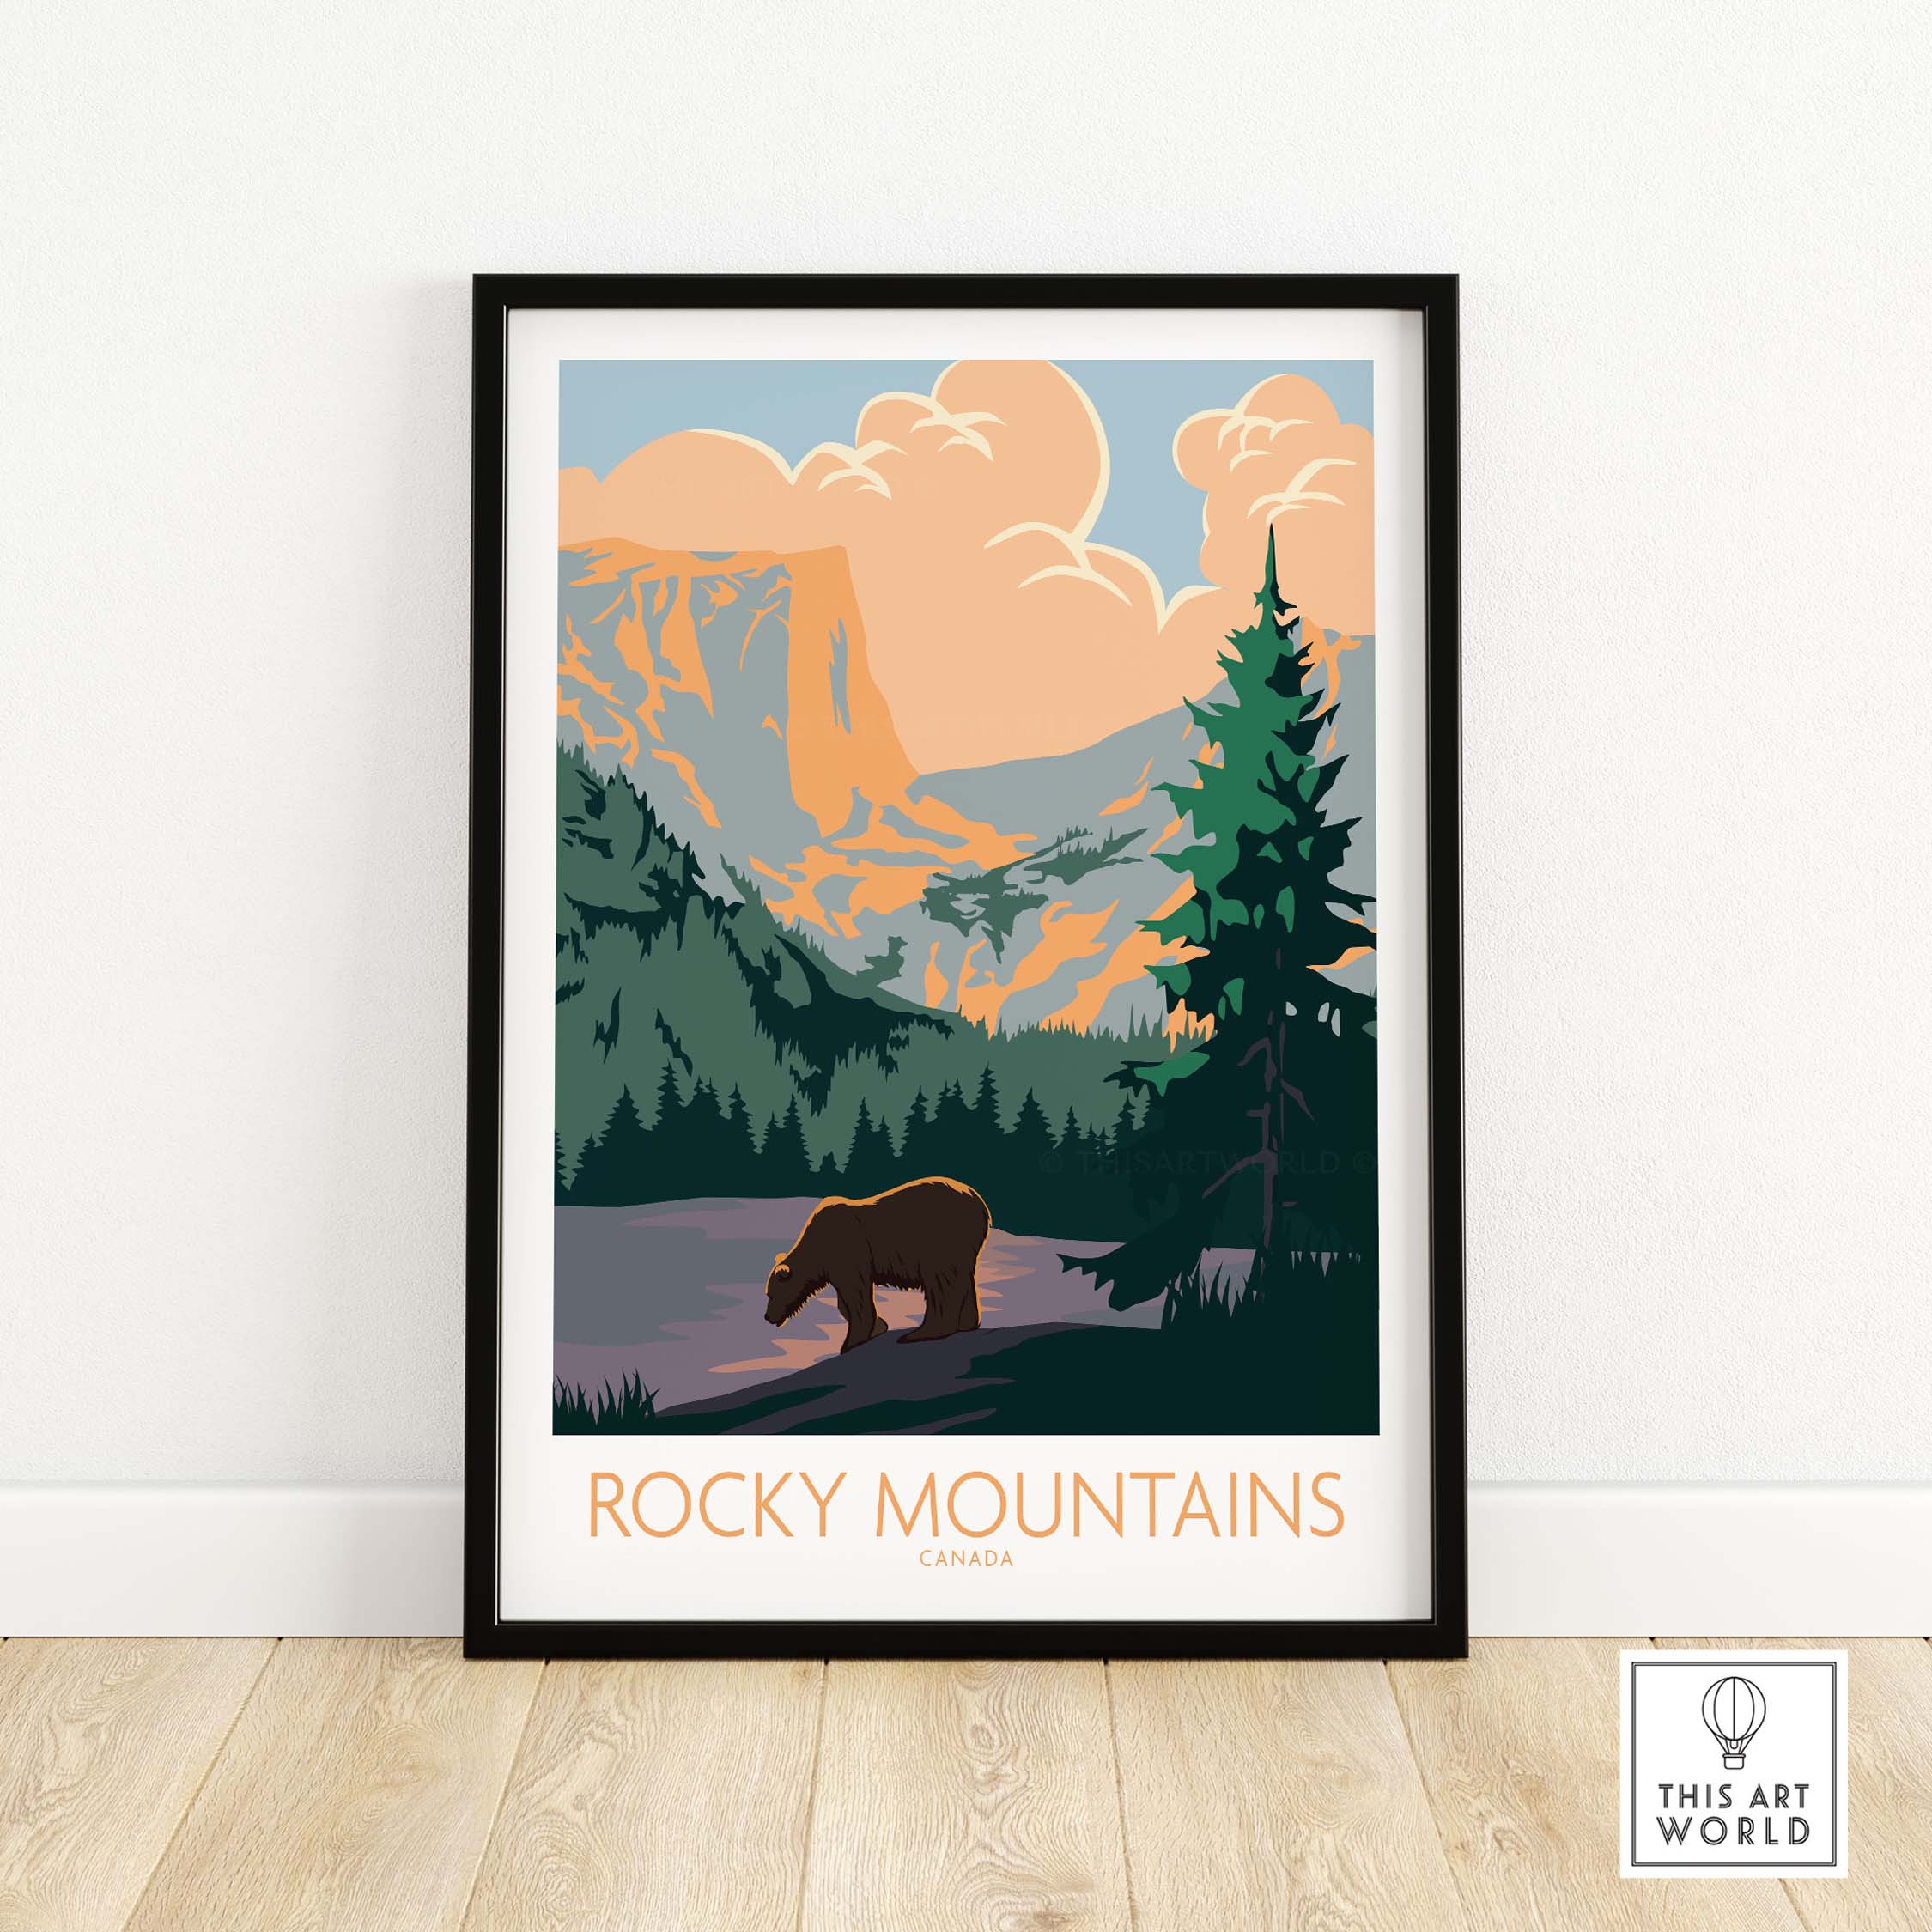 Canadian National Park Posters | Wall Art Decor